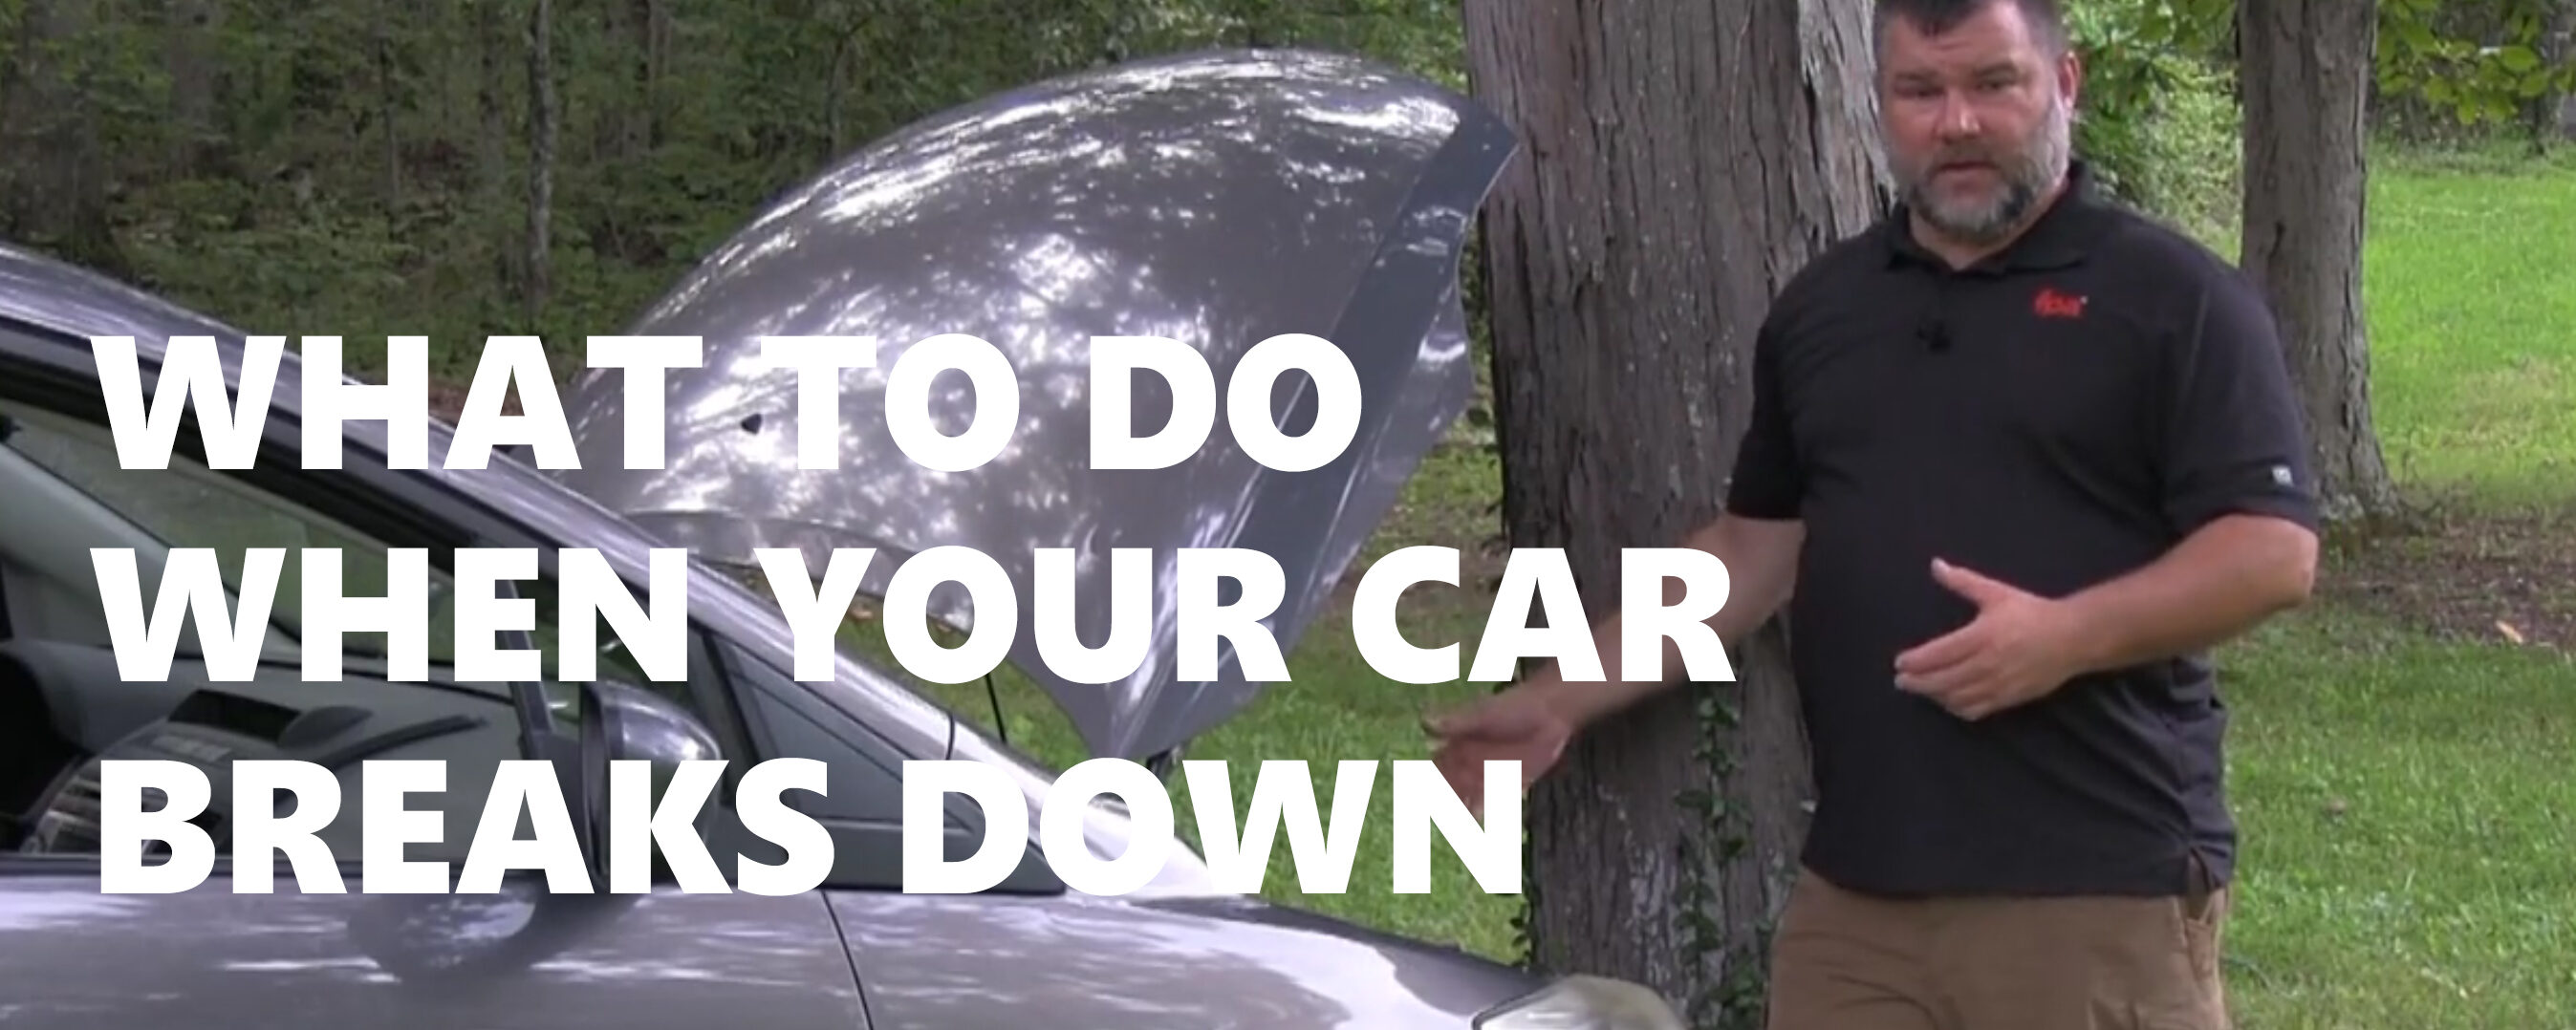 Survival Situations: What to Do When Your Car Breaks Down